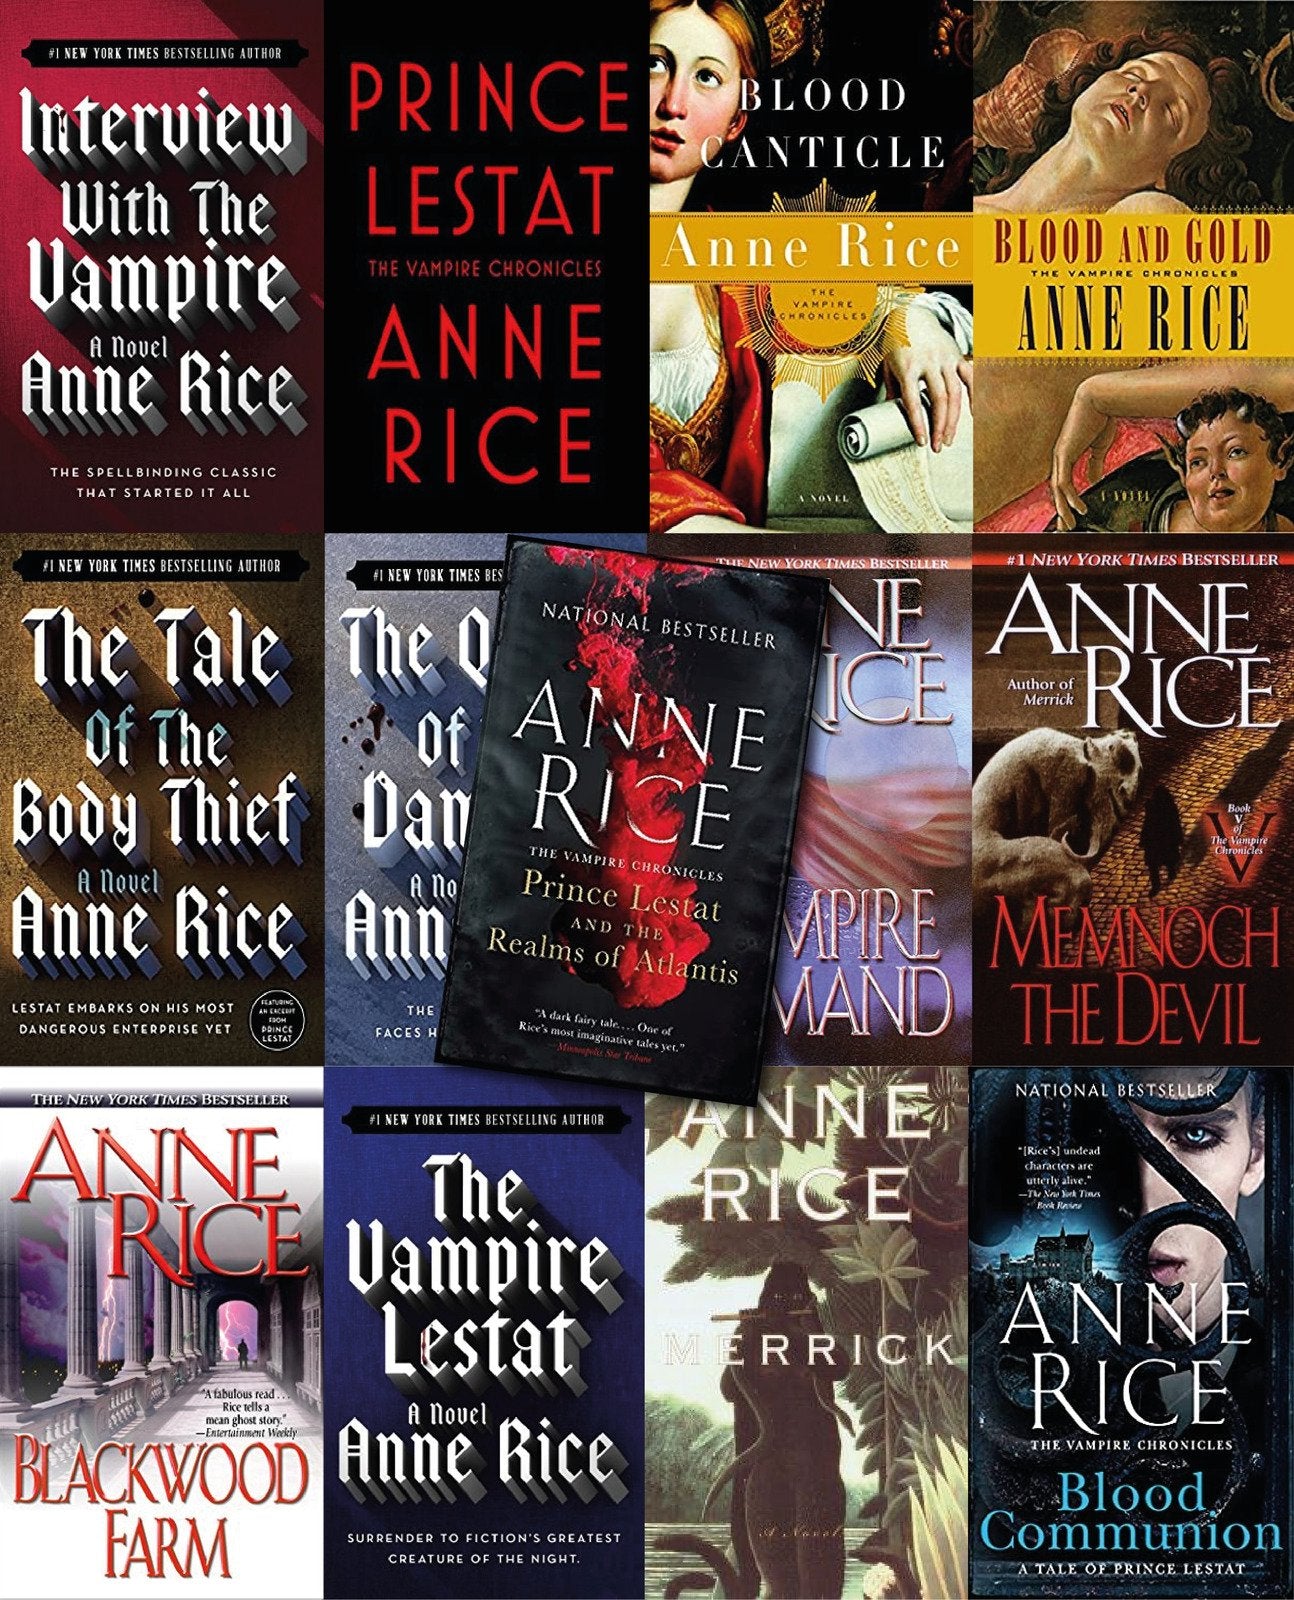 The Vampires Series by Anne Rice 13 MP3 AUDIOBOOK COLLECTION